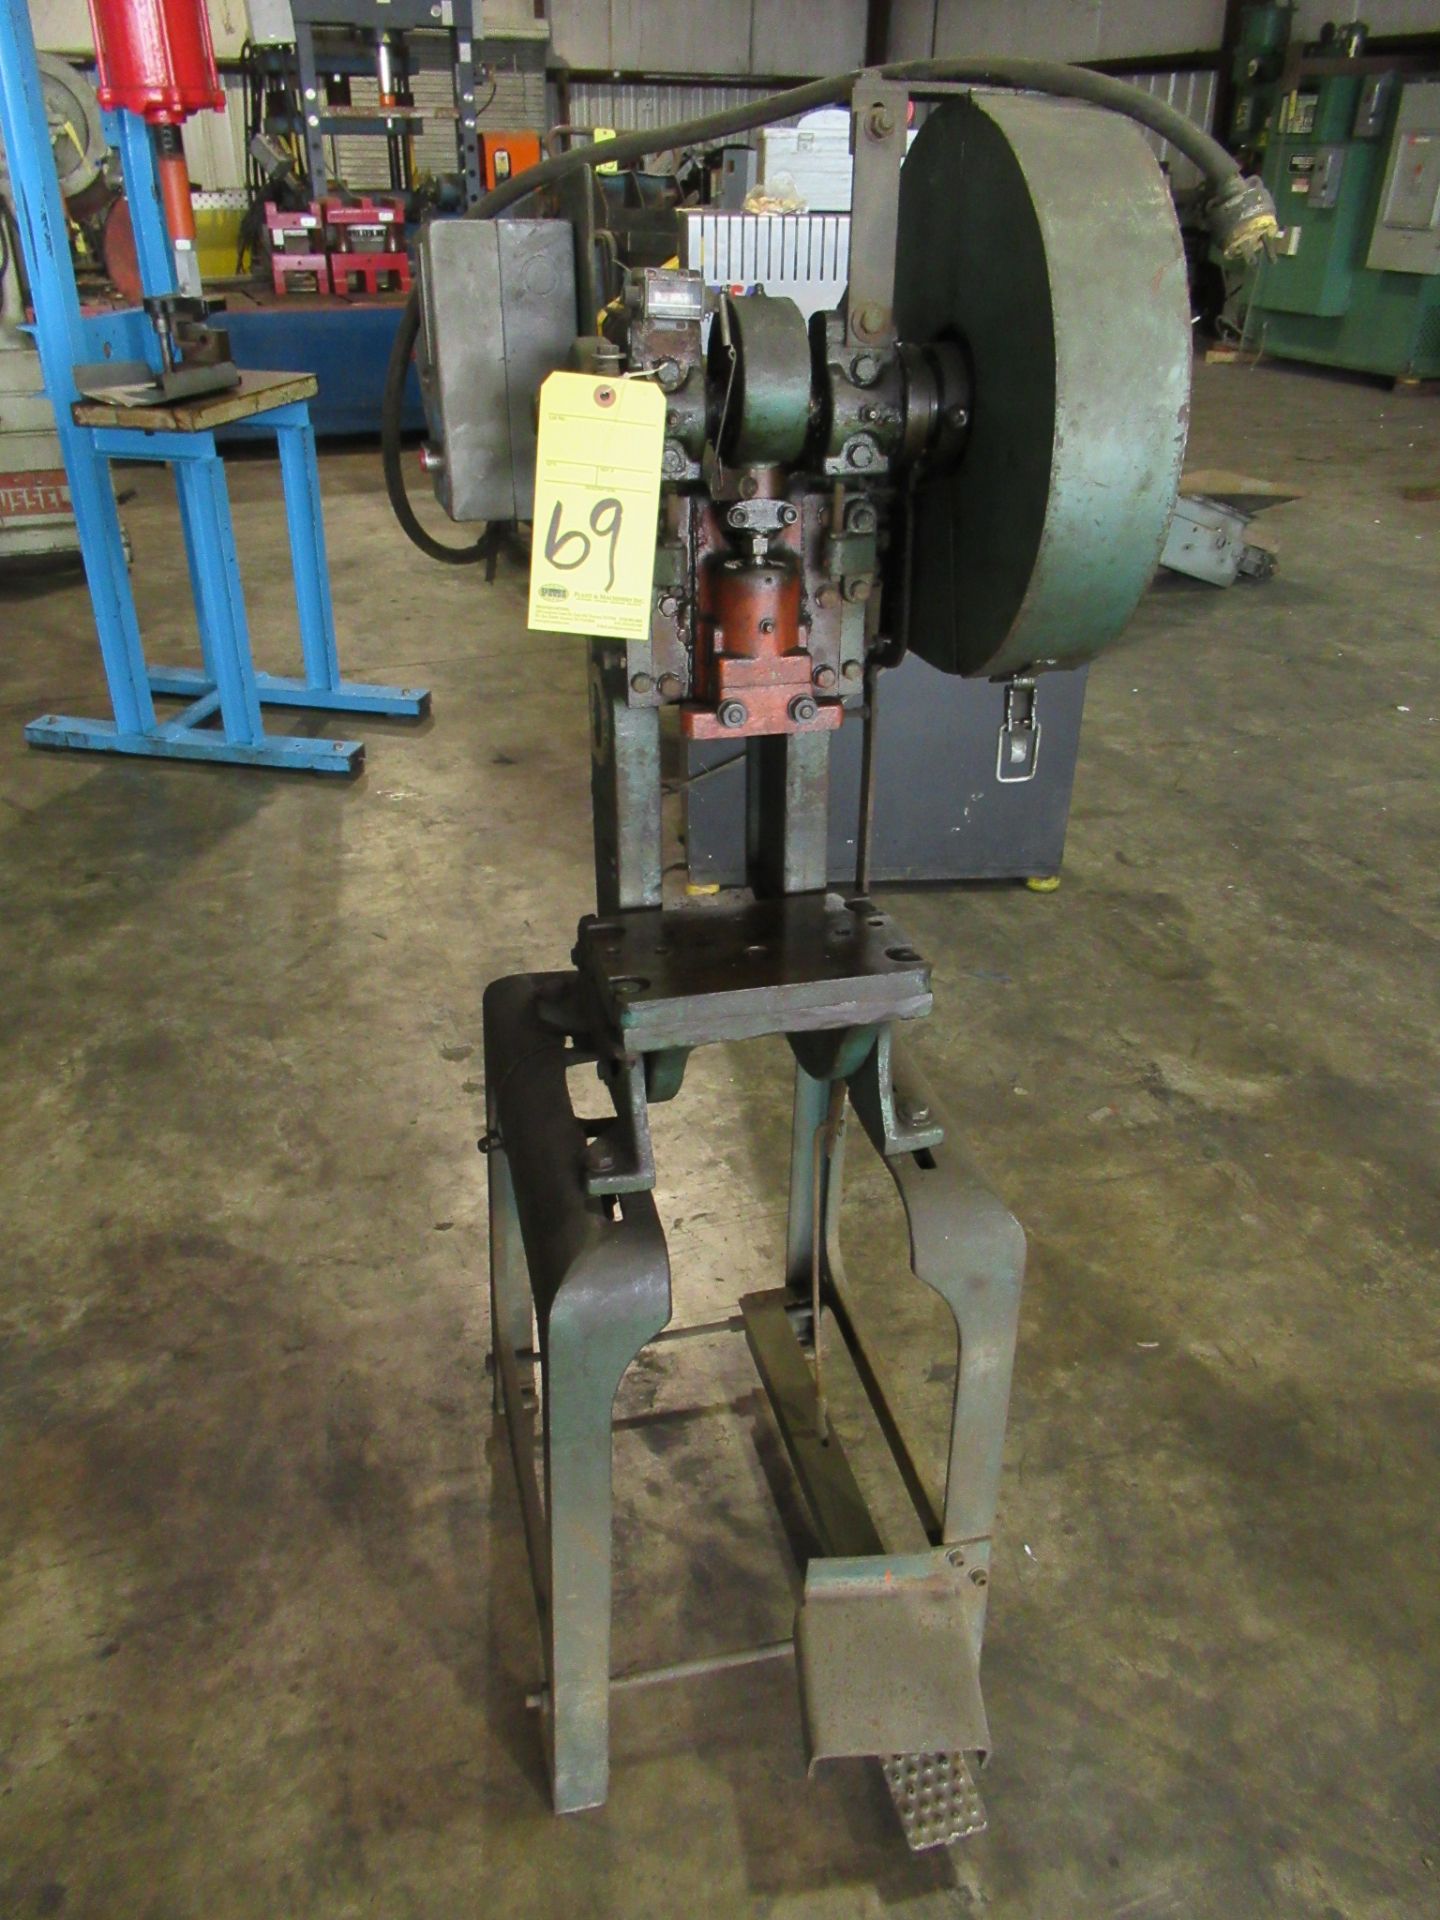 OBI PUNCH PRESS, BENCHMASTER MDL. 152E, 6 x 9 table, S/N 46114 (Location D: Specialized